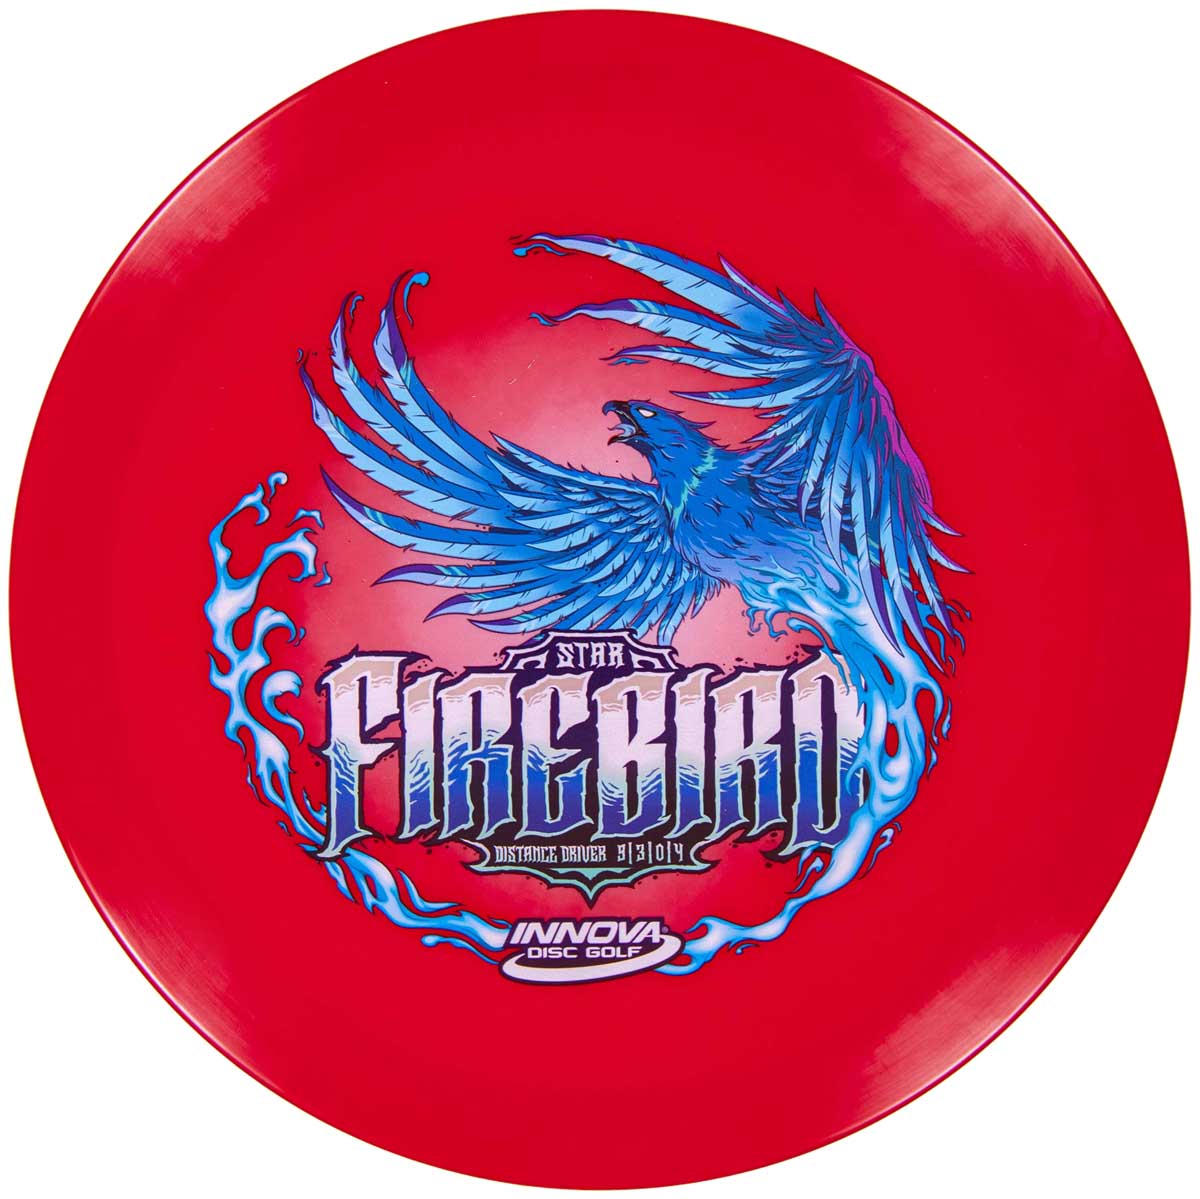 Full Color Discs - InnVision Firebird - Overstable Driver. Red color. 